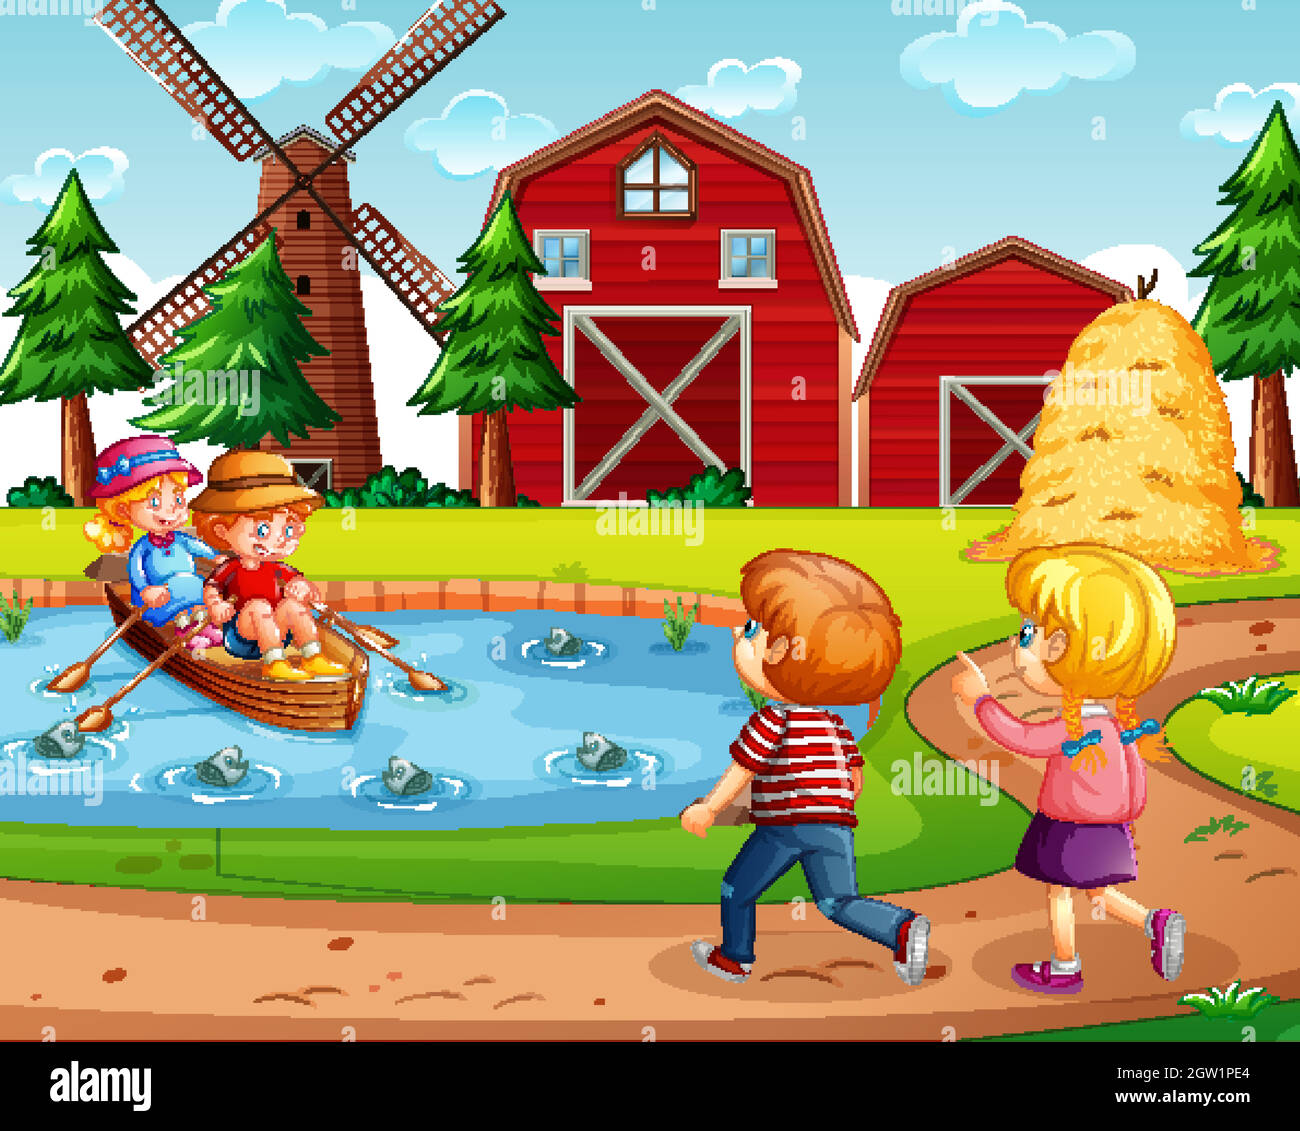 Four kids in the farm with red barn and windmill scene Stock Vector